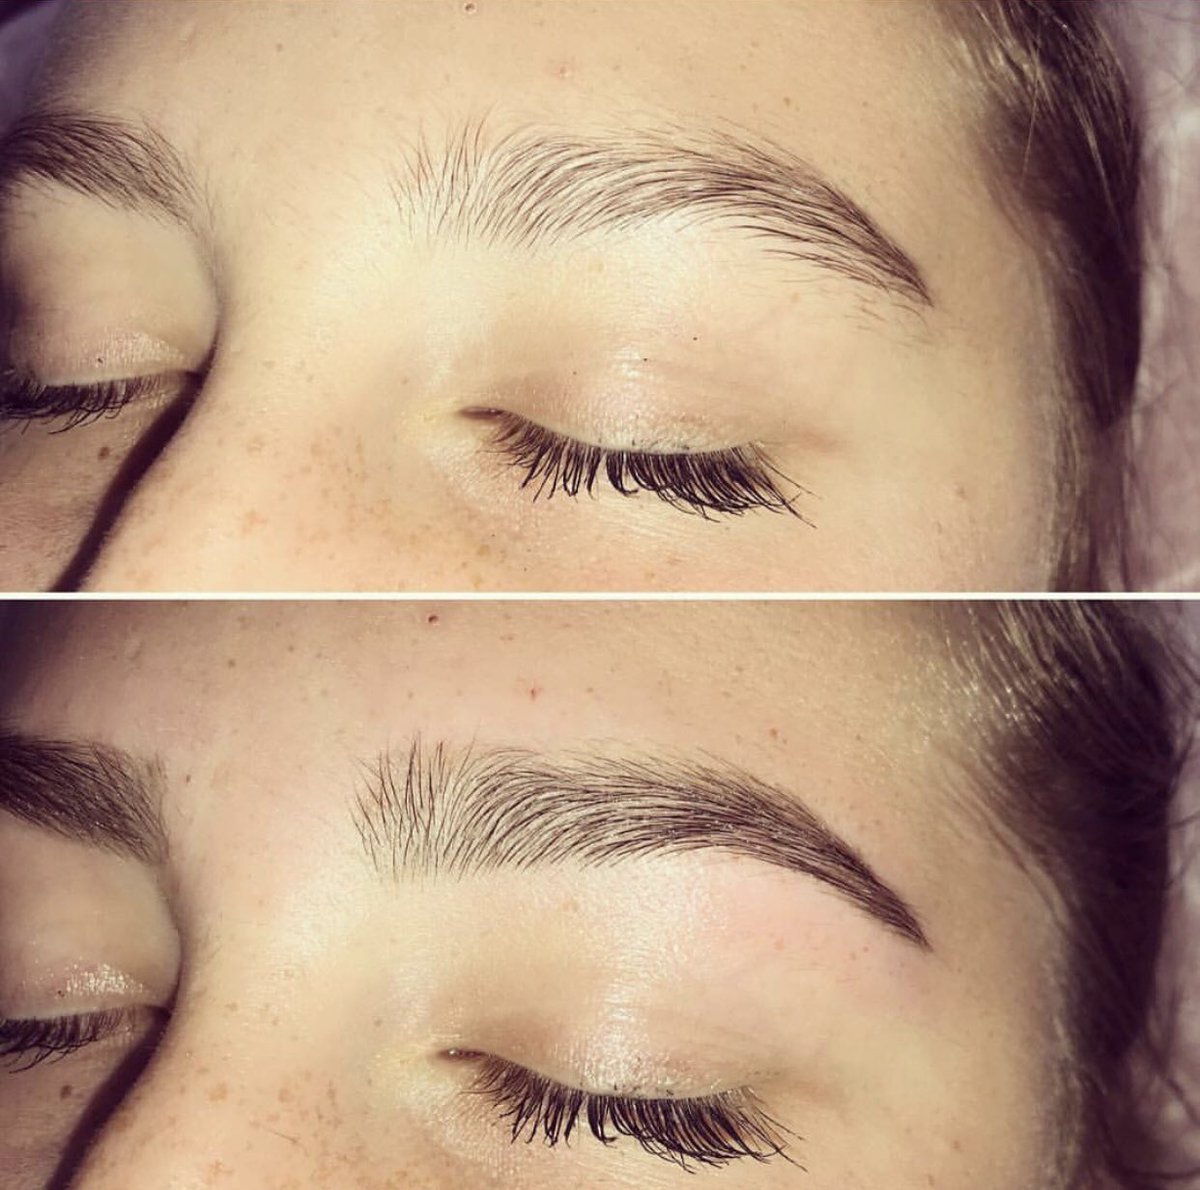 A straight, smooooth SASSY set to match the beautiful Kirsty’s features and vibes 💗✨ #cutie #feminist #beauty #sassstudio #browartist #browstylist #browsonfleek #browsonpoint #browjamartist #beautiful